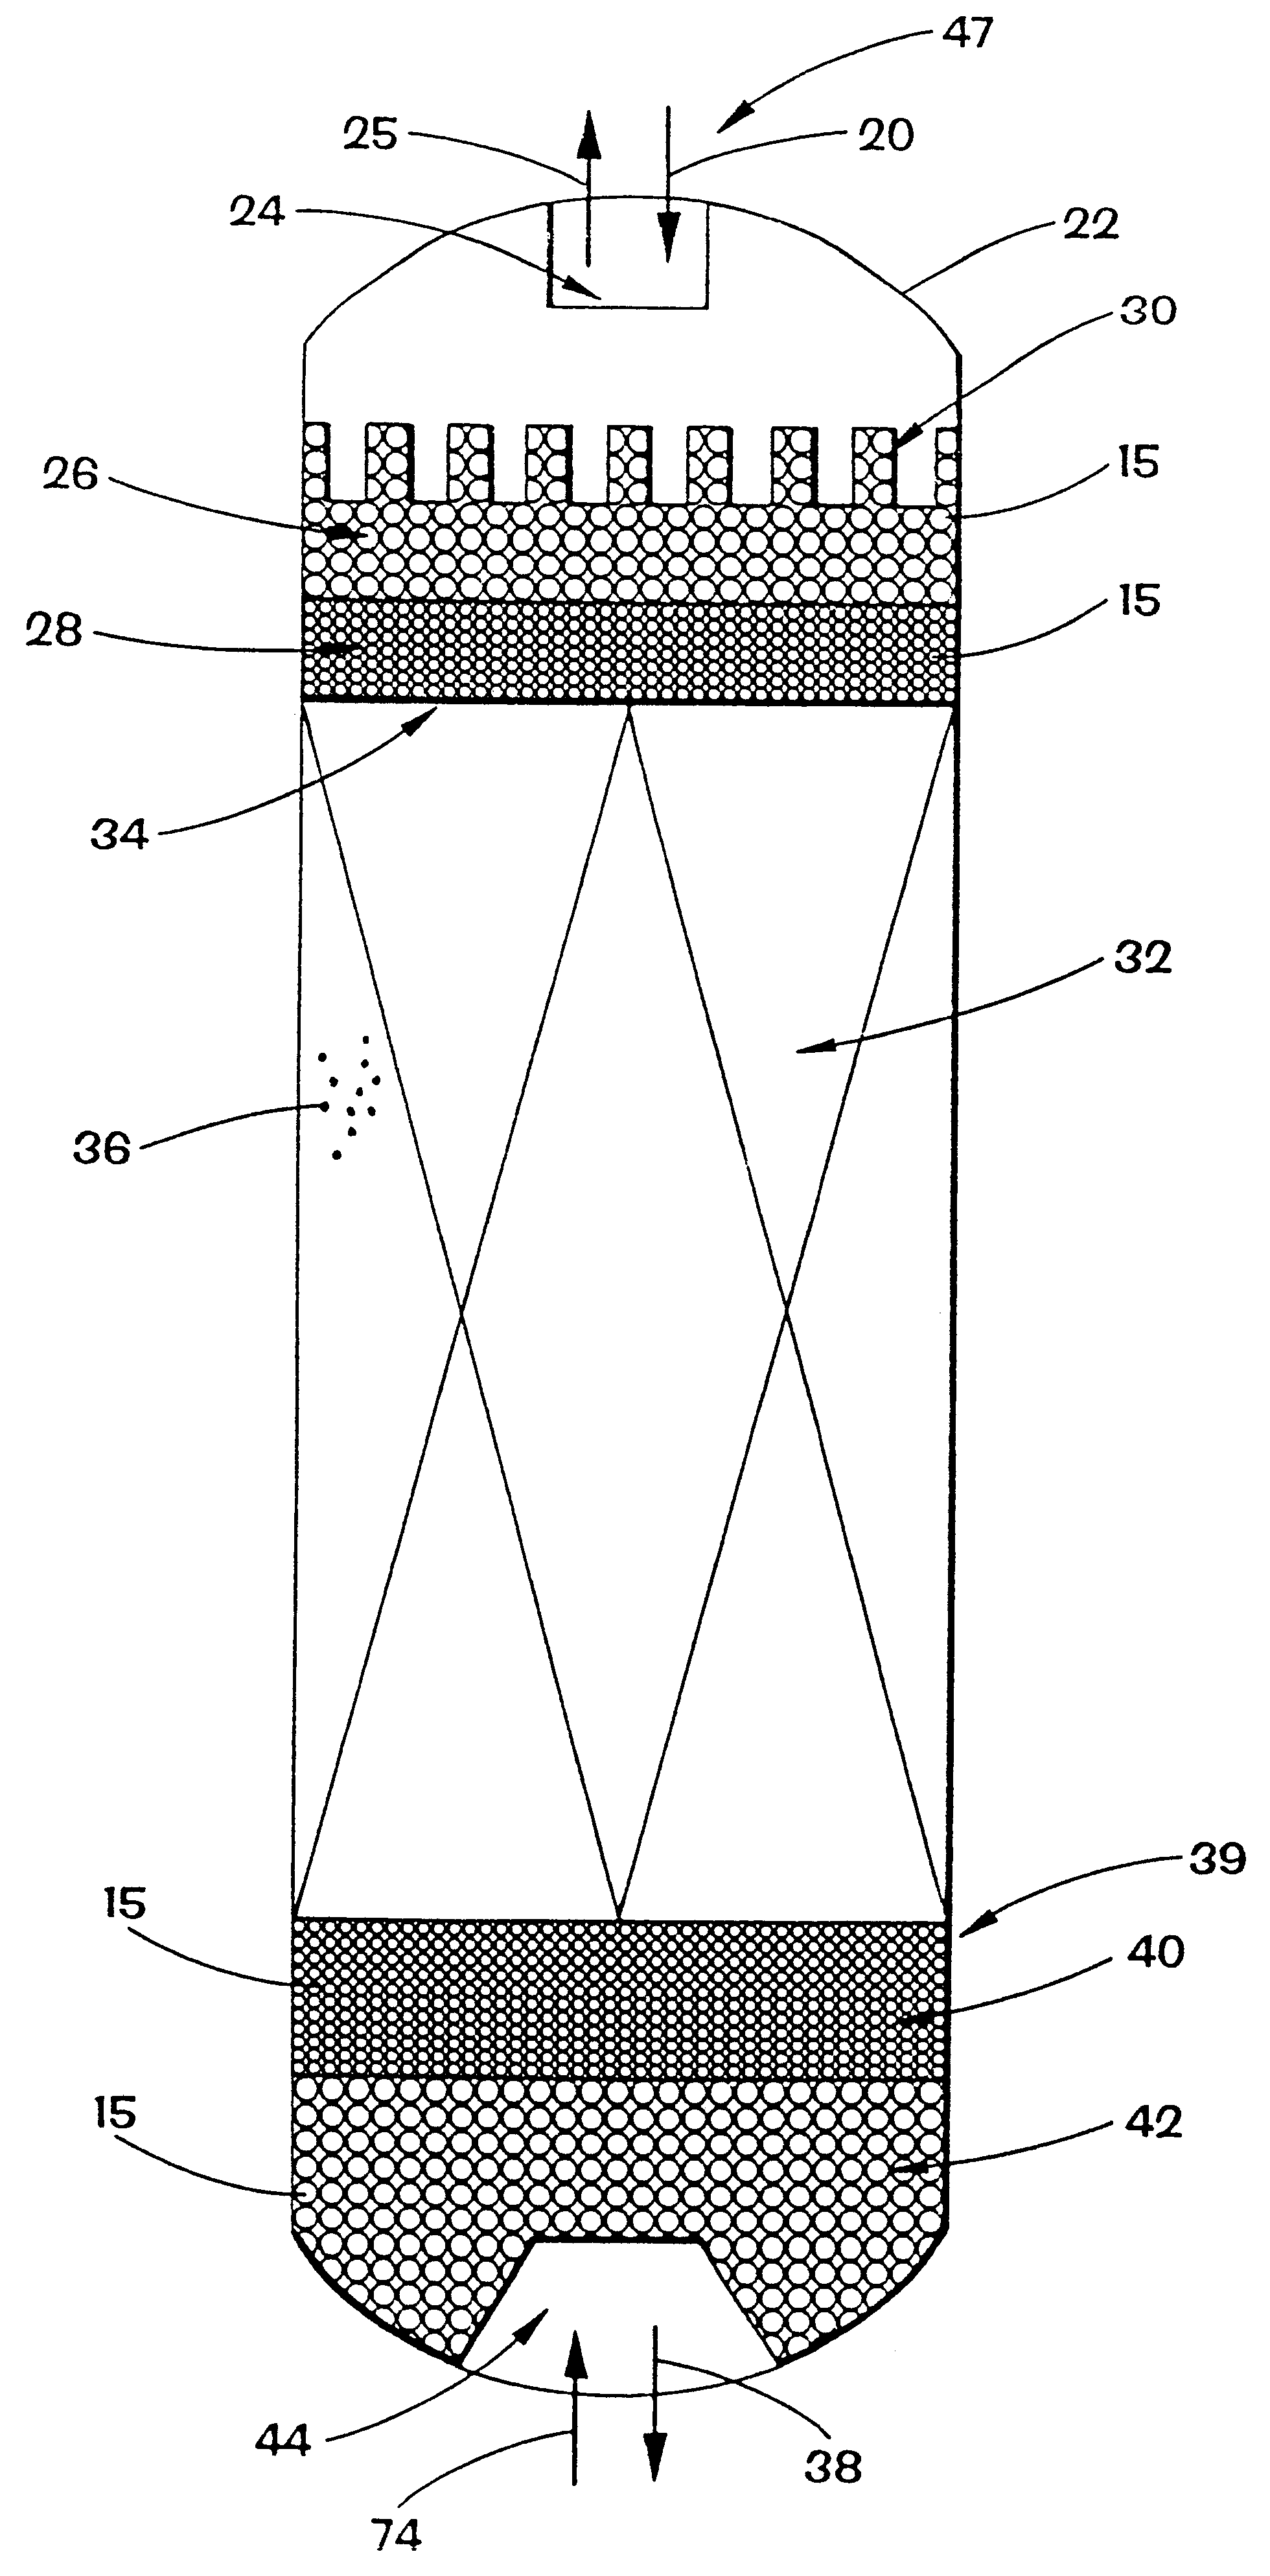 Filtration and flow distribution method for chemical reactors